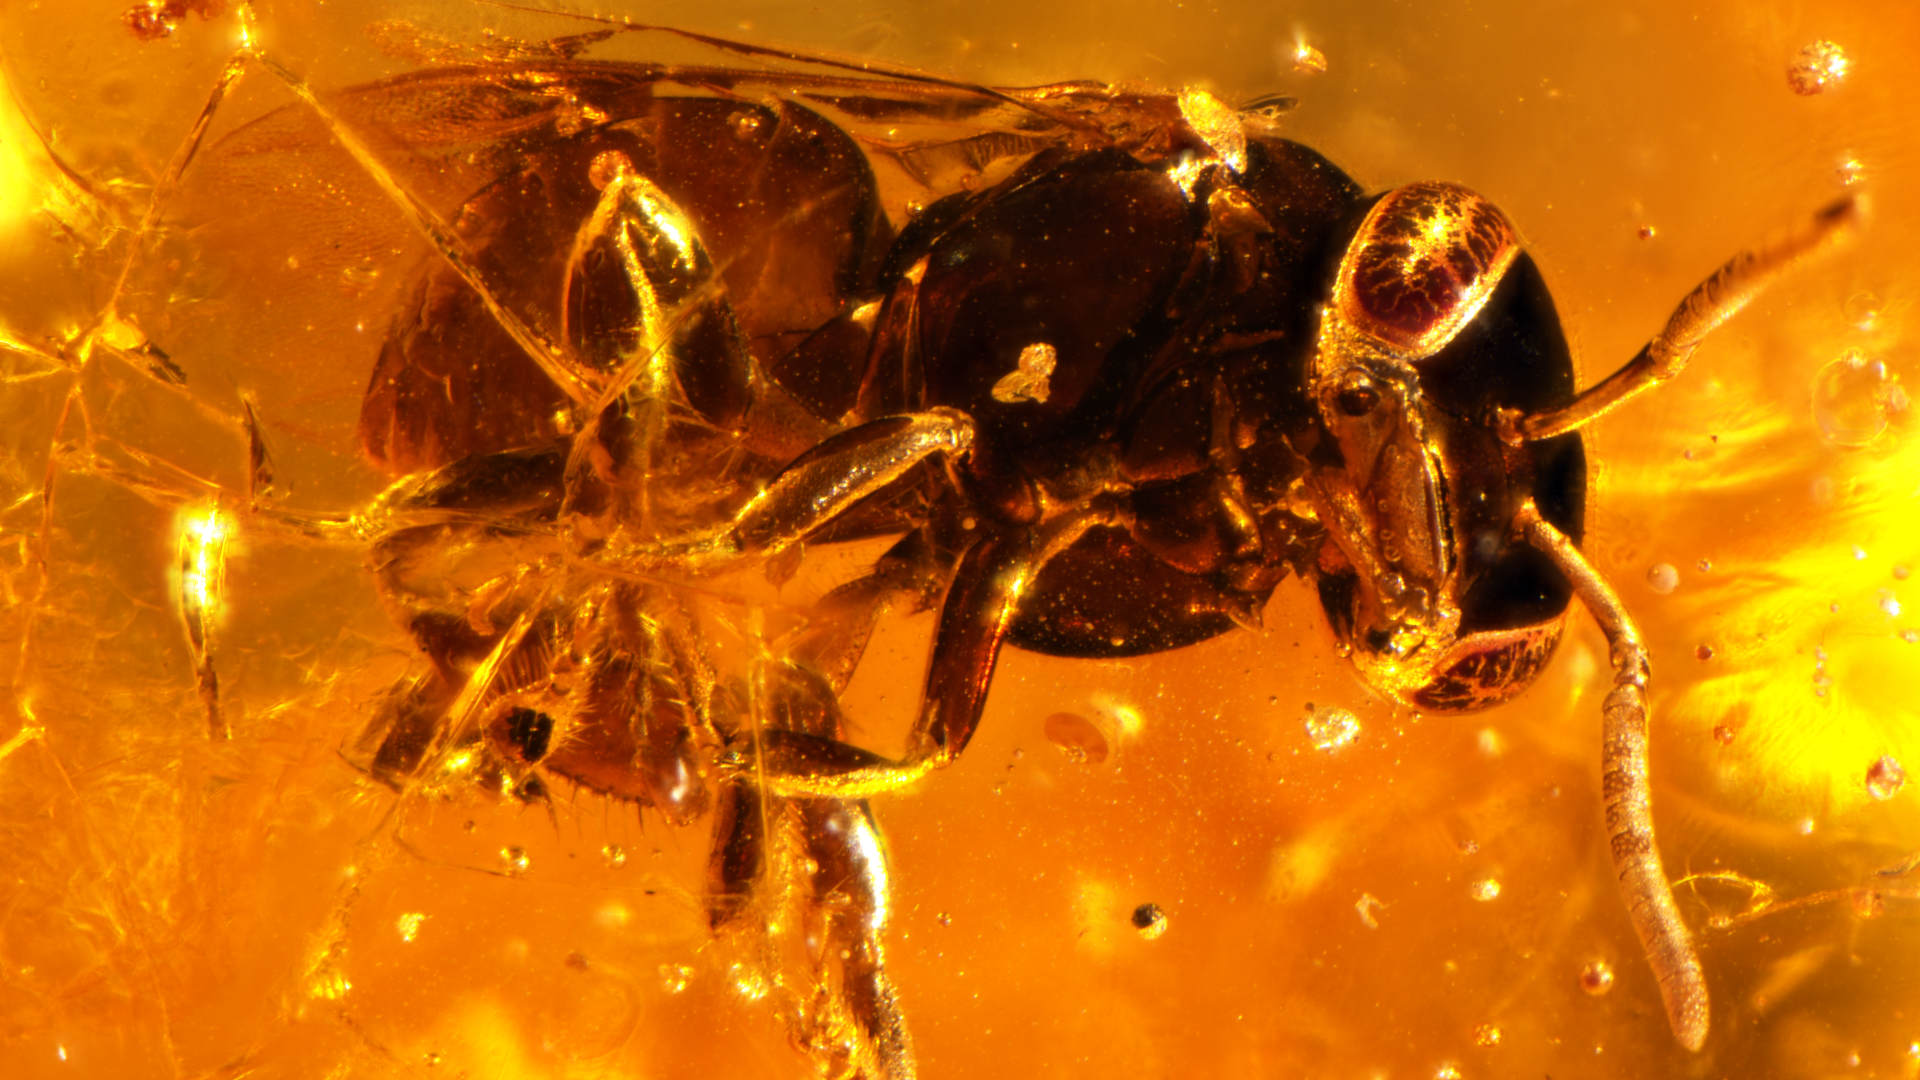 The bee species Hypotrigona kleineri, discovered in resin samples from eastern Africa first collected more than a century ago, is now believed to be extinct.